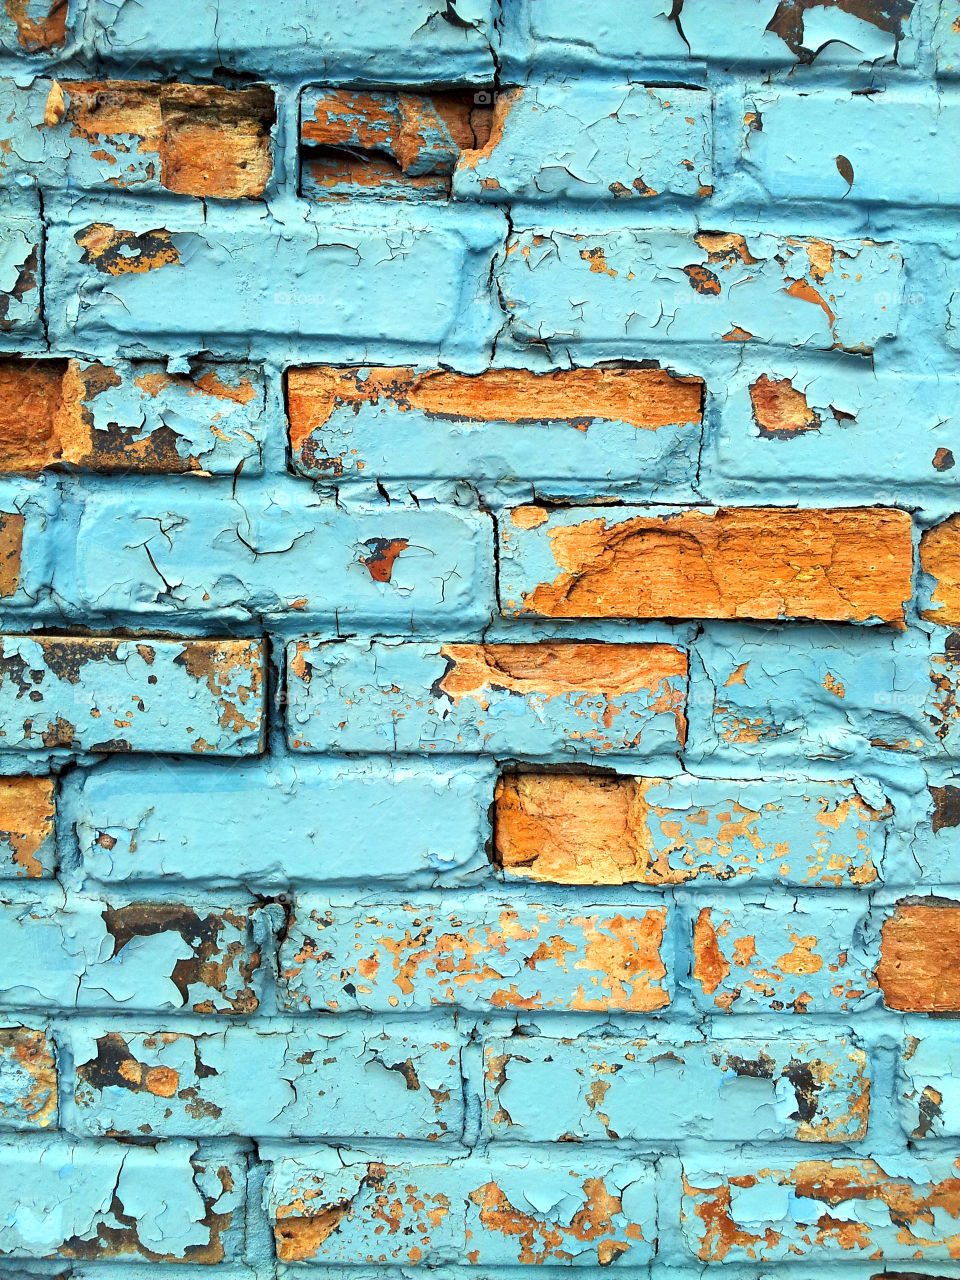 Brick wall with faded chipped blue paint